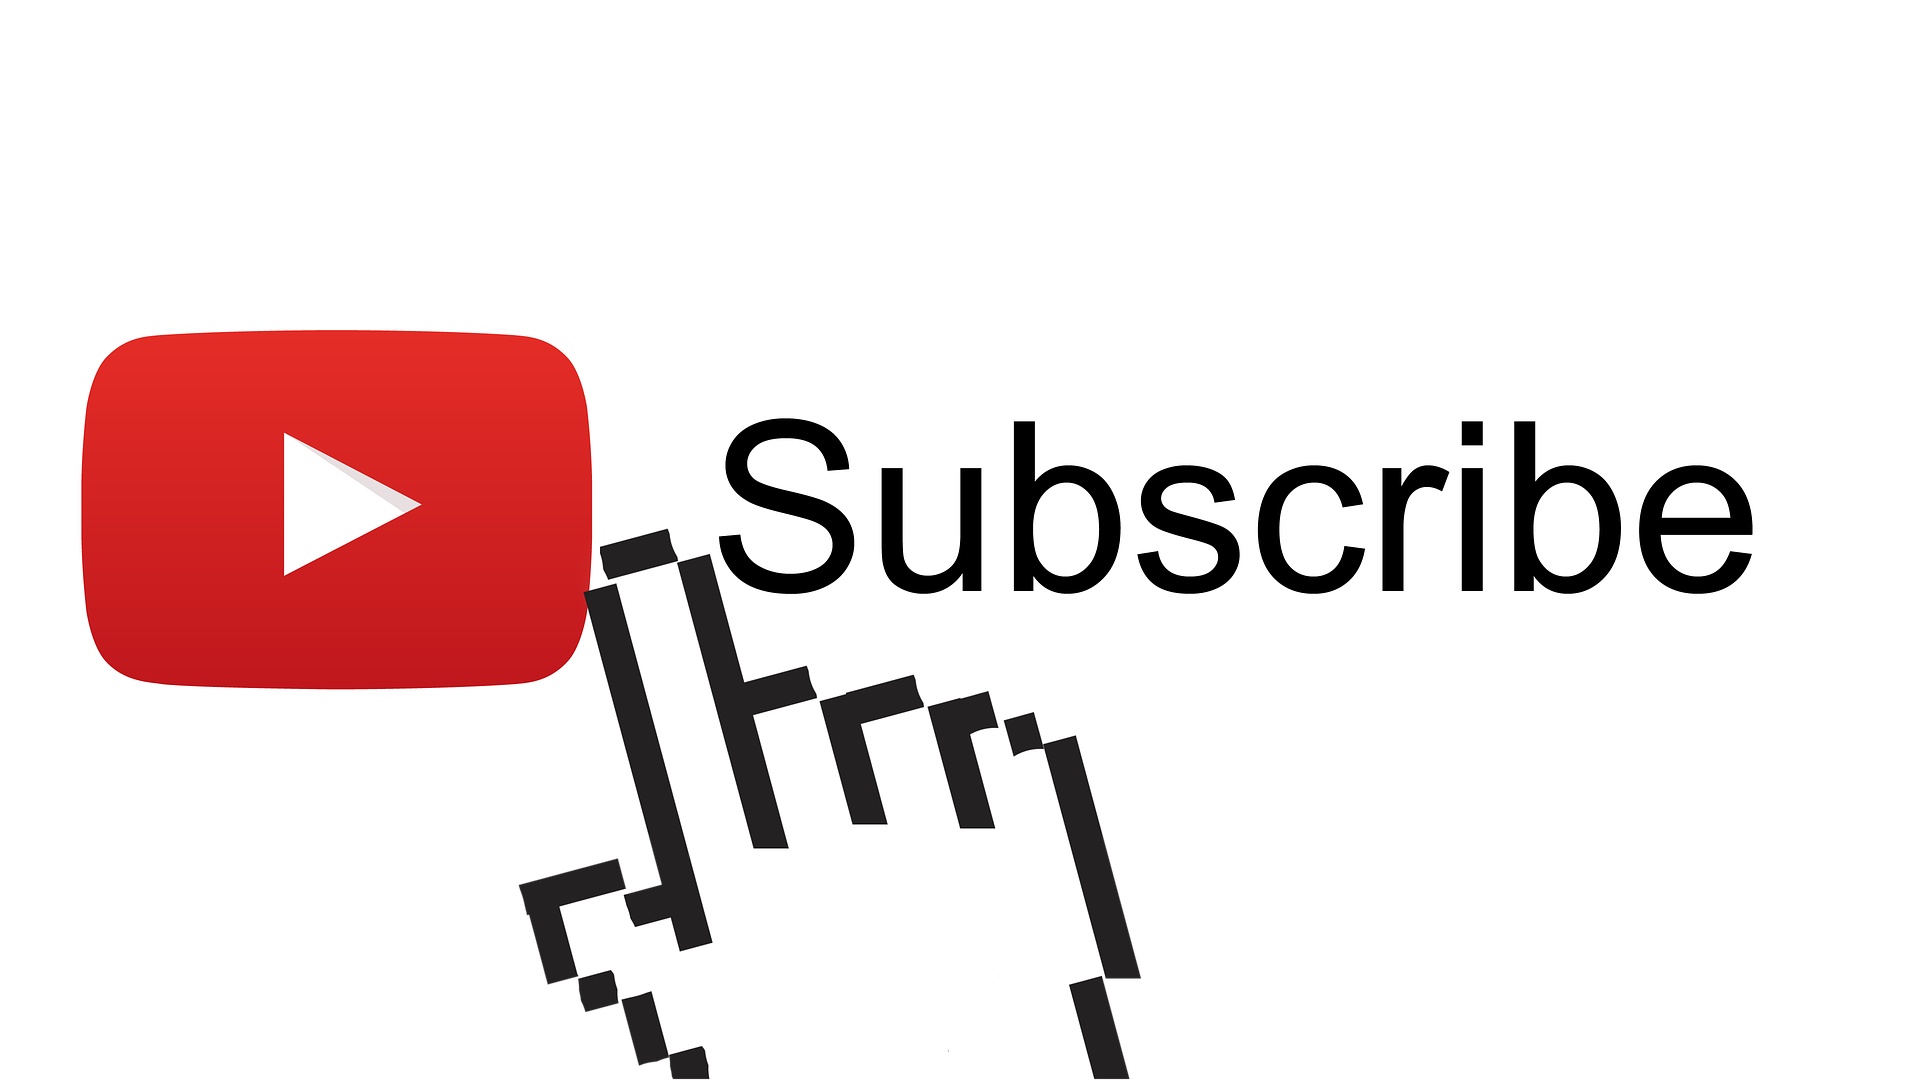 Subscribe 2048x1152 - Yt Banner Template | Hicorisico